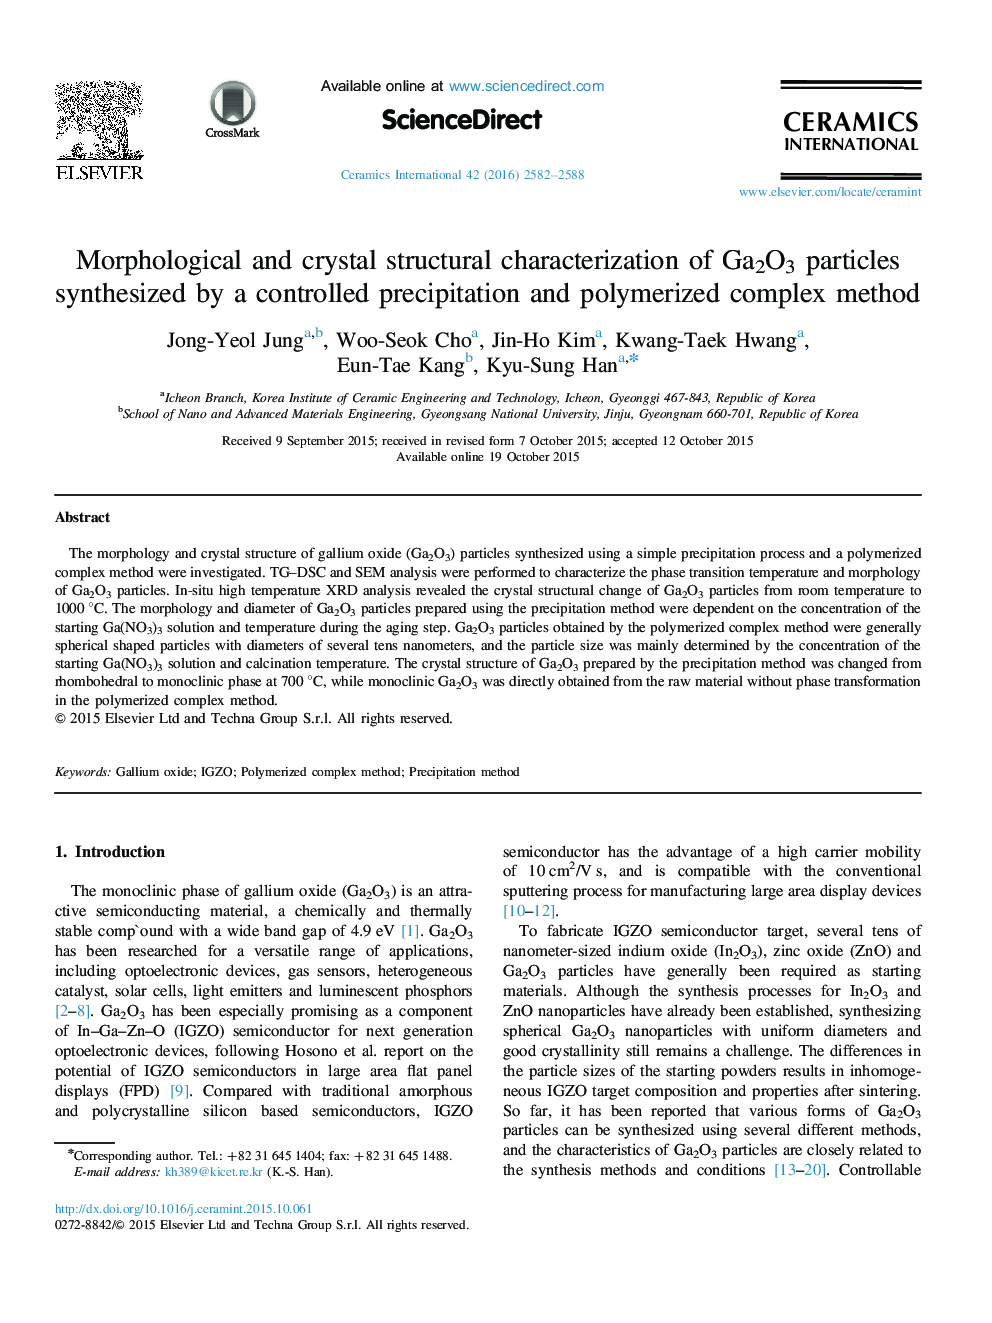 Morphological and crystal structural characterization of Ga2O3 particles synthesized by a controlled precipitation and polymerized complex method